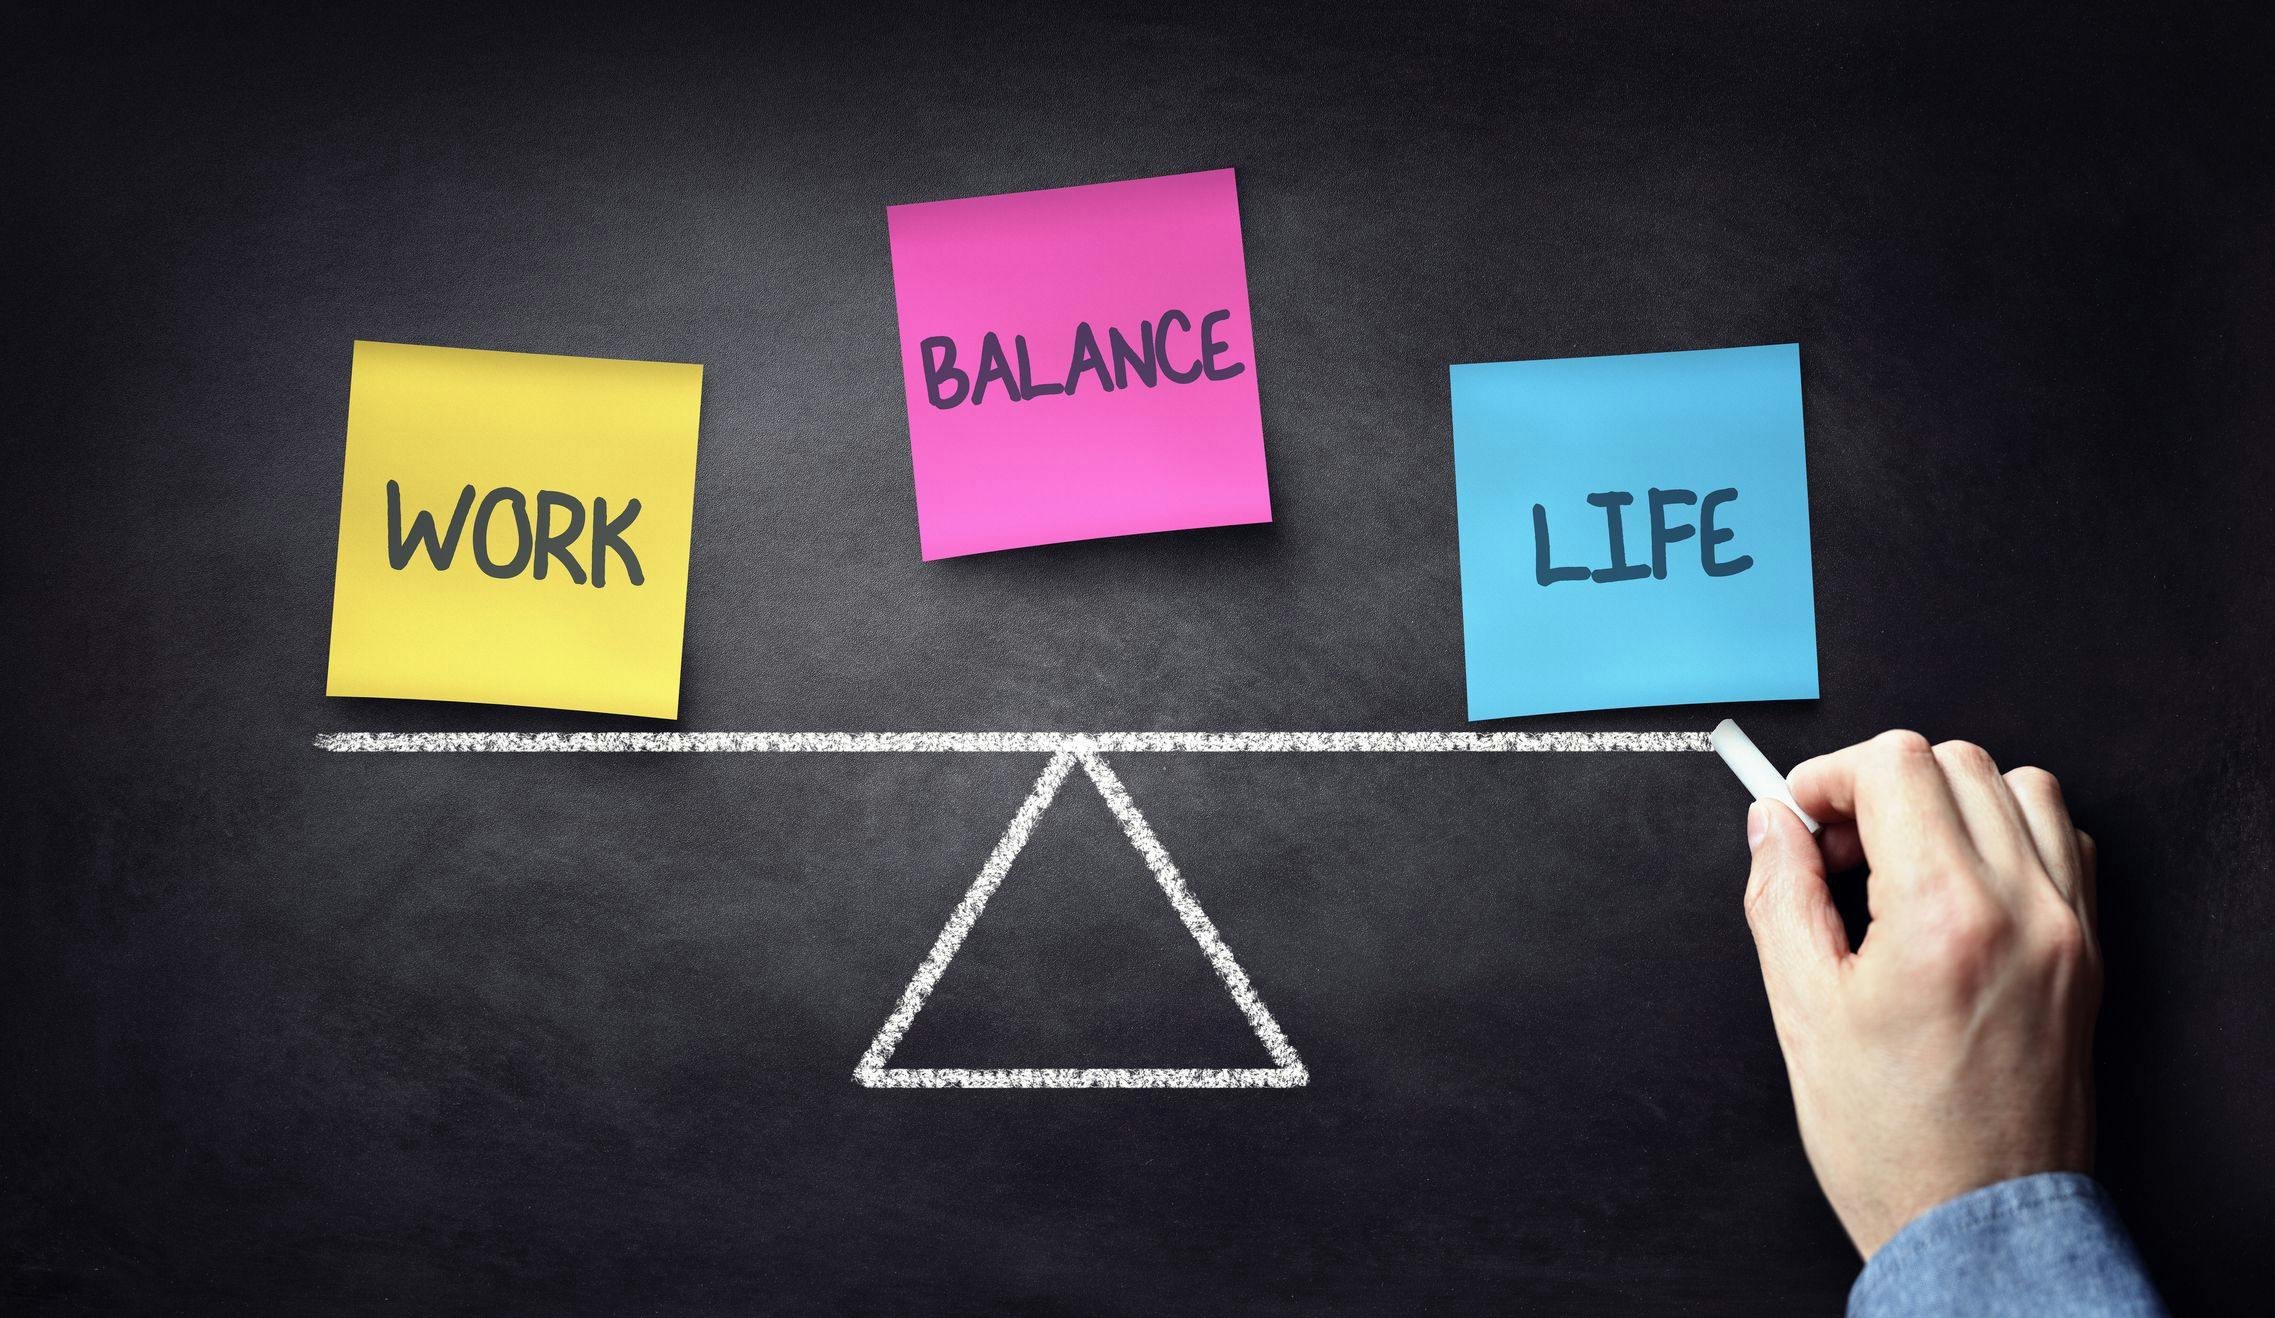 Balance work and life as a techie